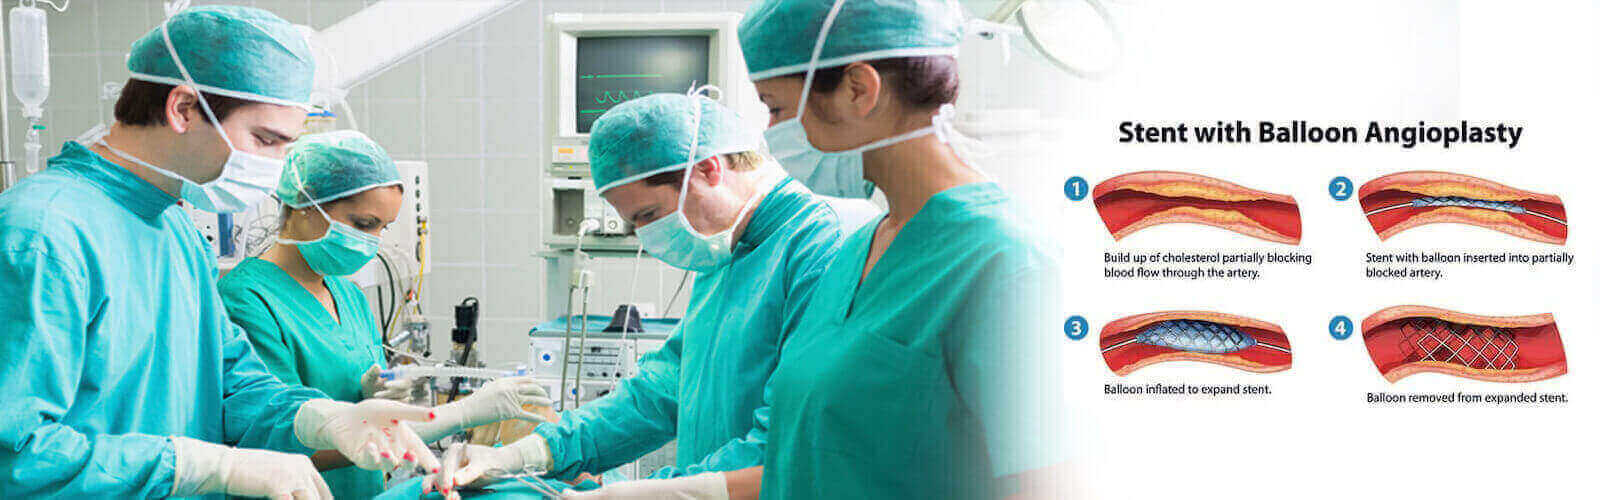 Angioplasty Surgery in United States